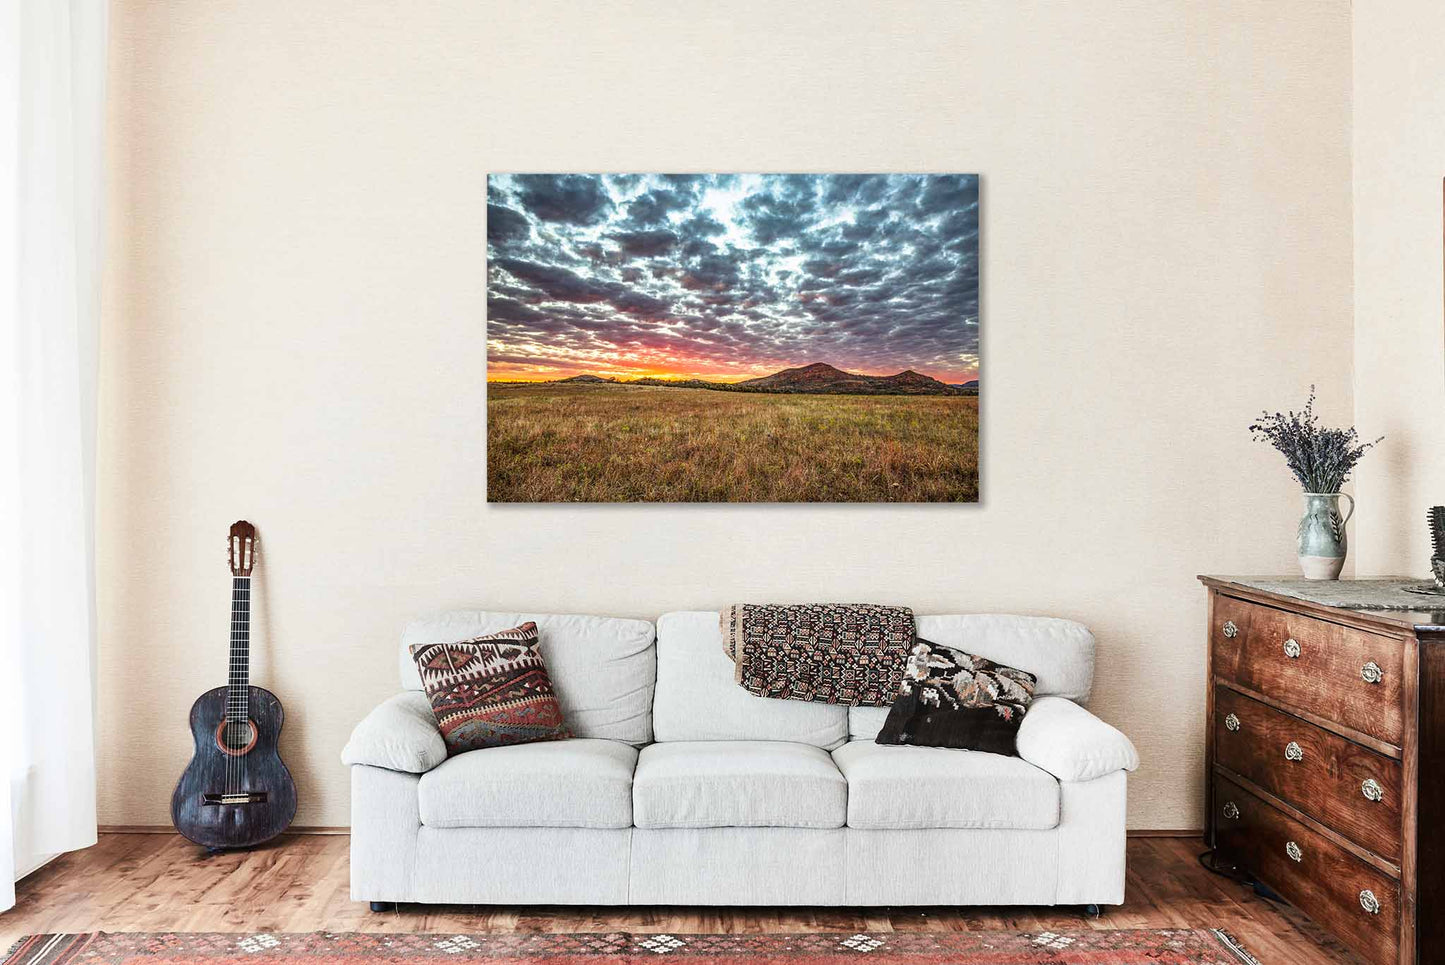 Wichita Mountains Canvas Wall Art (Ready to Hang) Gallery Wrap of Warm Sunset Over Mountains and Field of Prairie Grass on Autumn Evening in Oklahoma Great Plains Photography Nature Decor